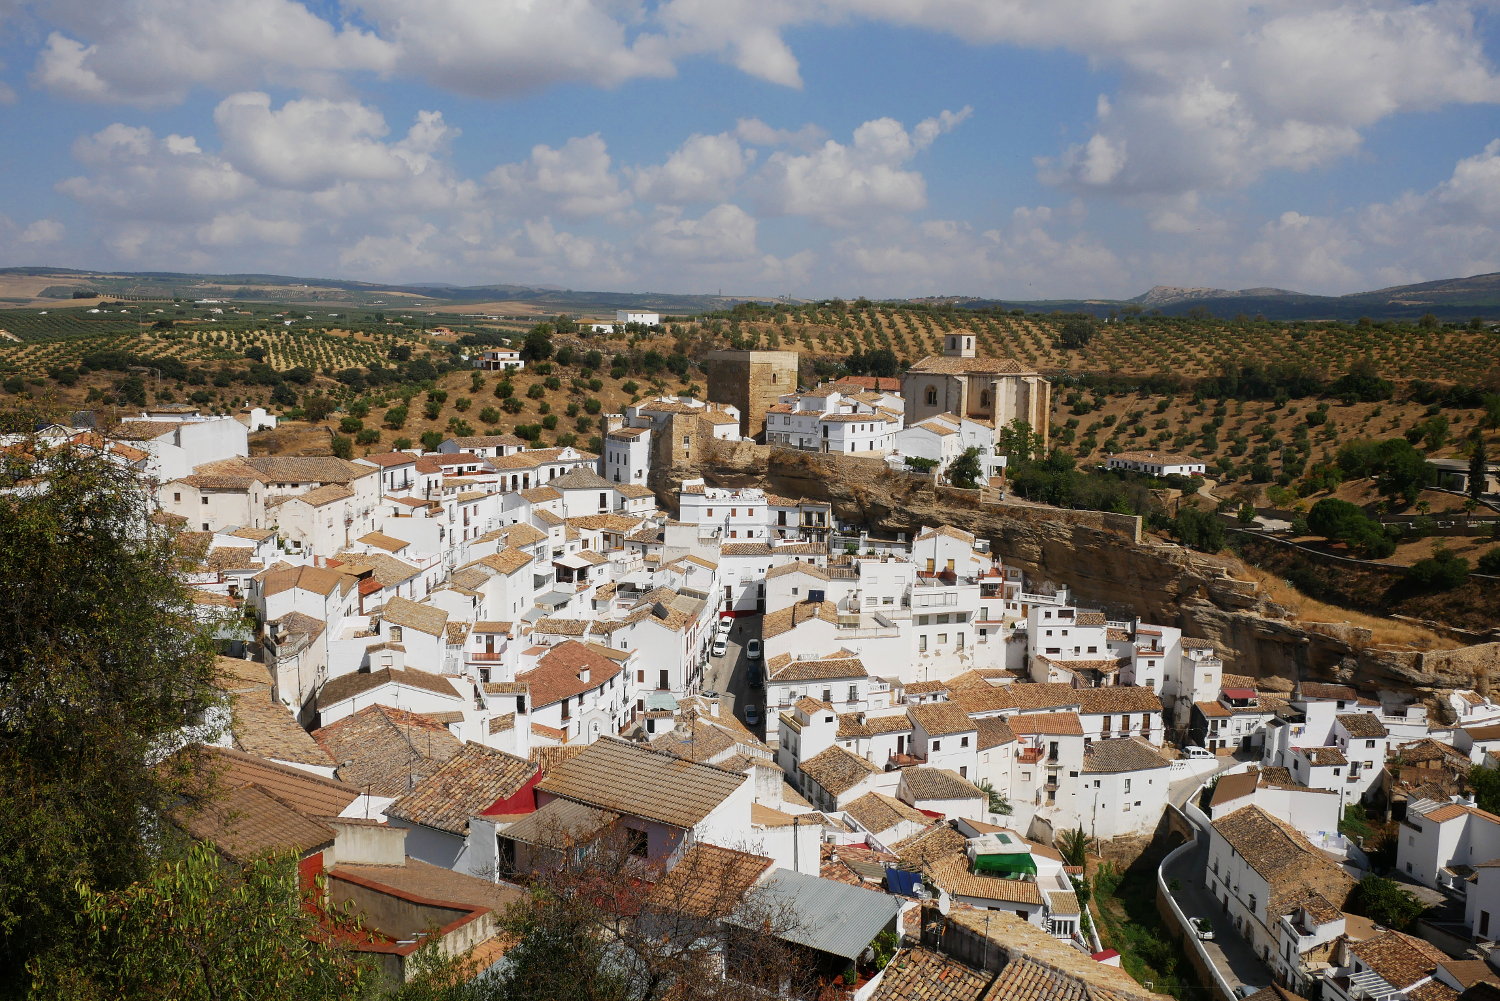 The spectacular Spanish town that stands on top of a cliff 50